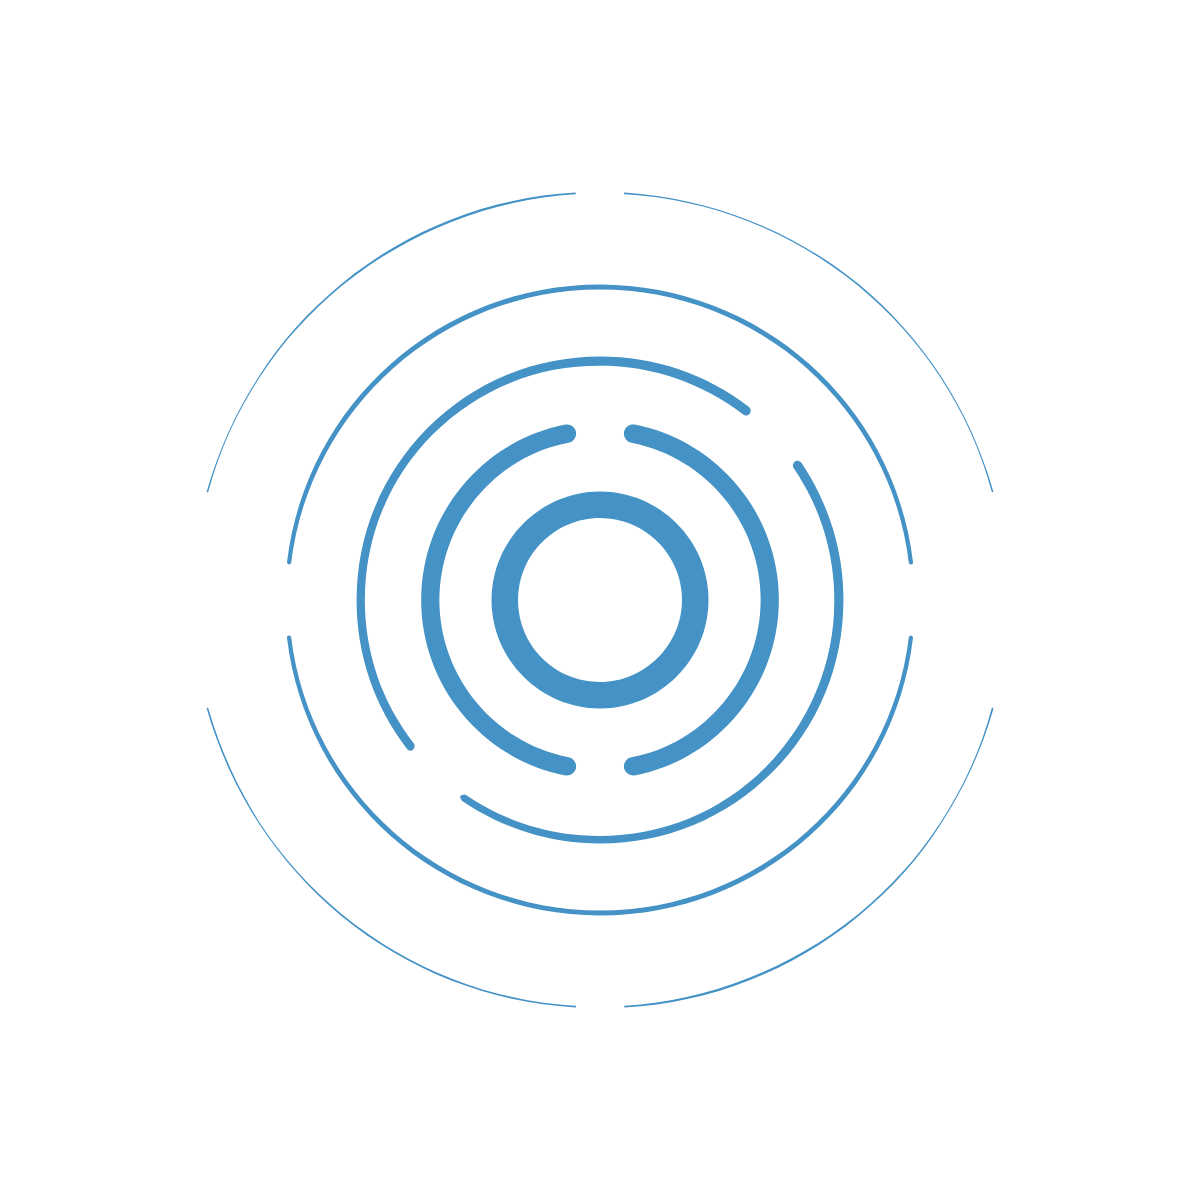 Icon of ripples from a center circle